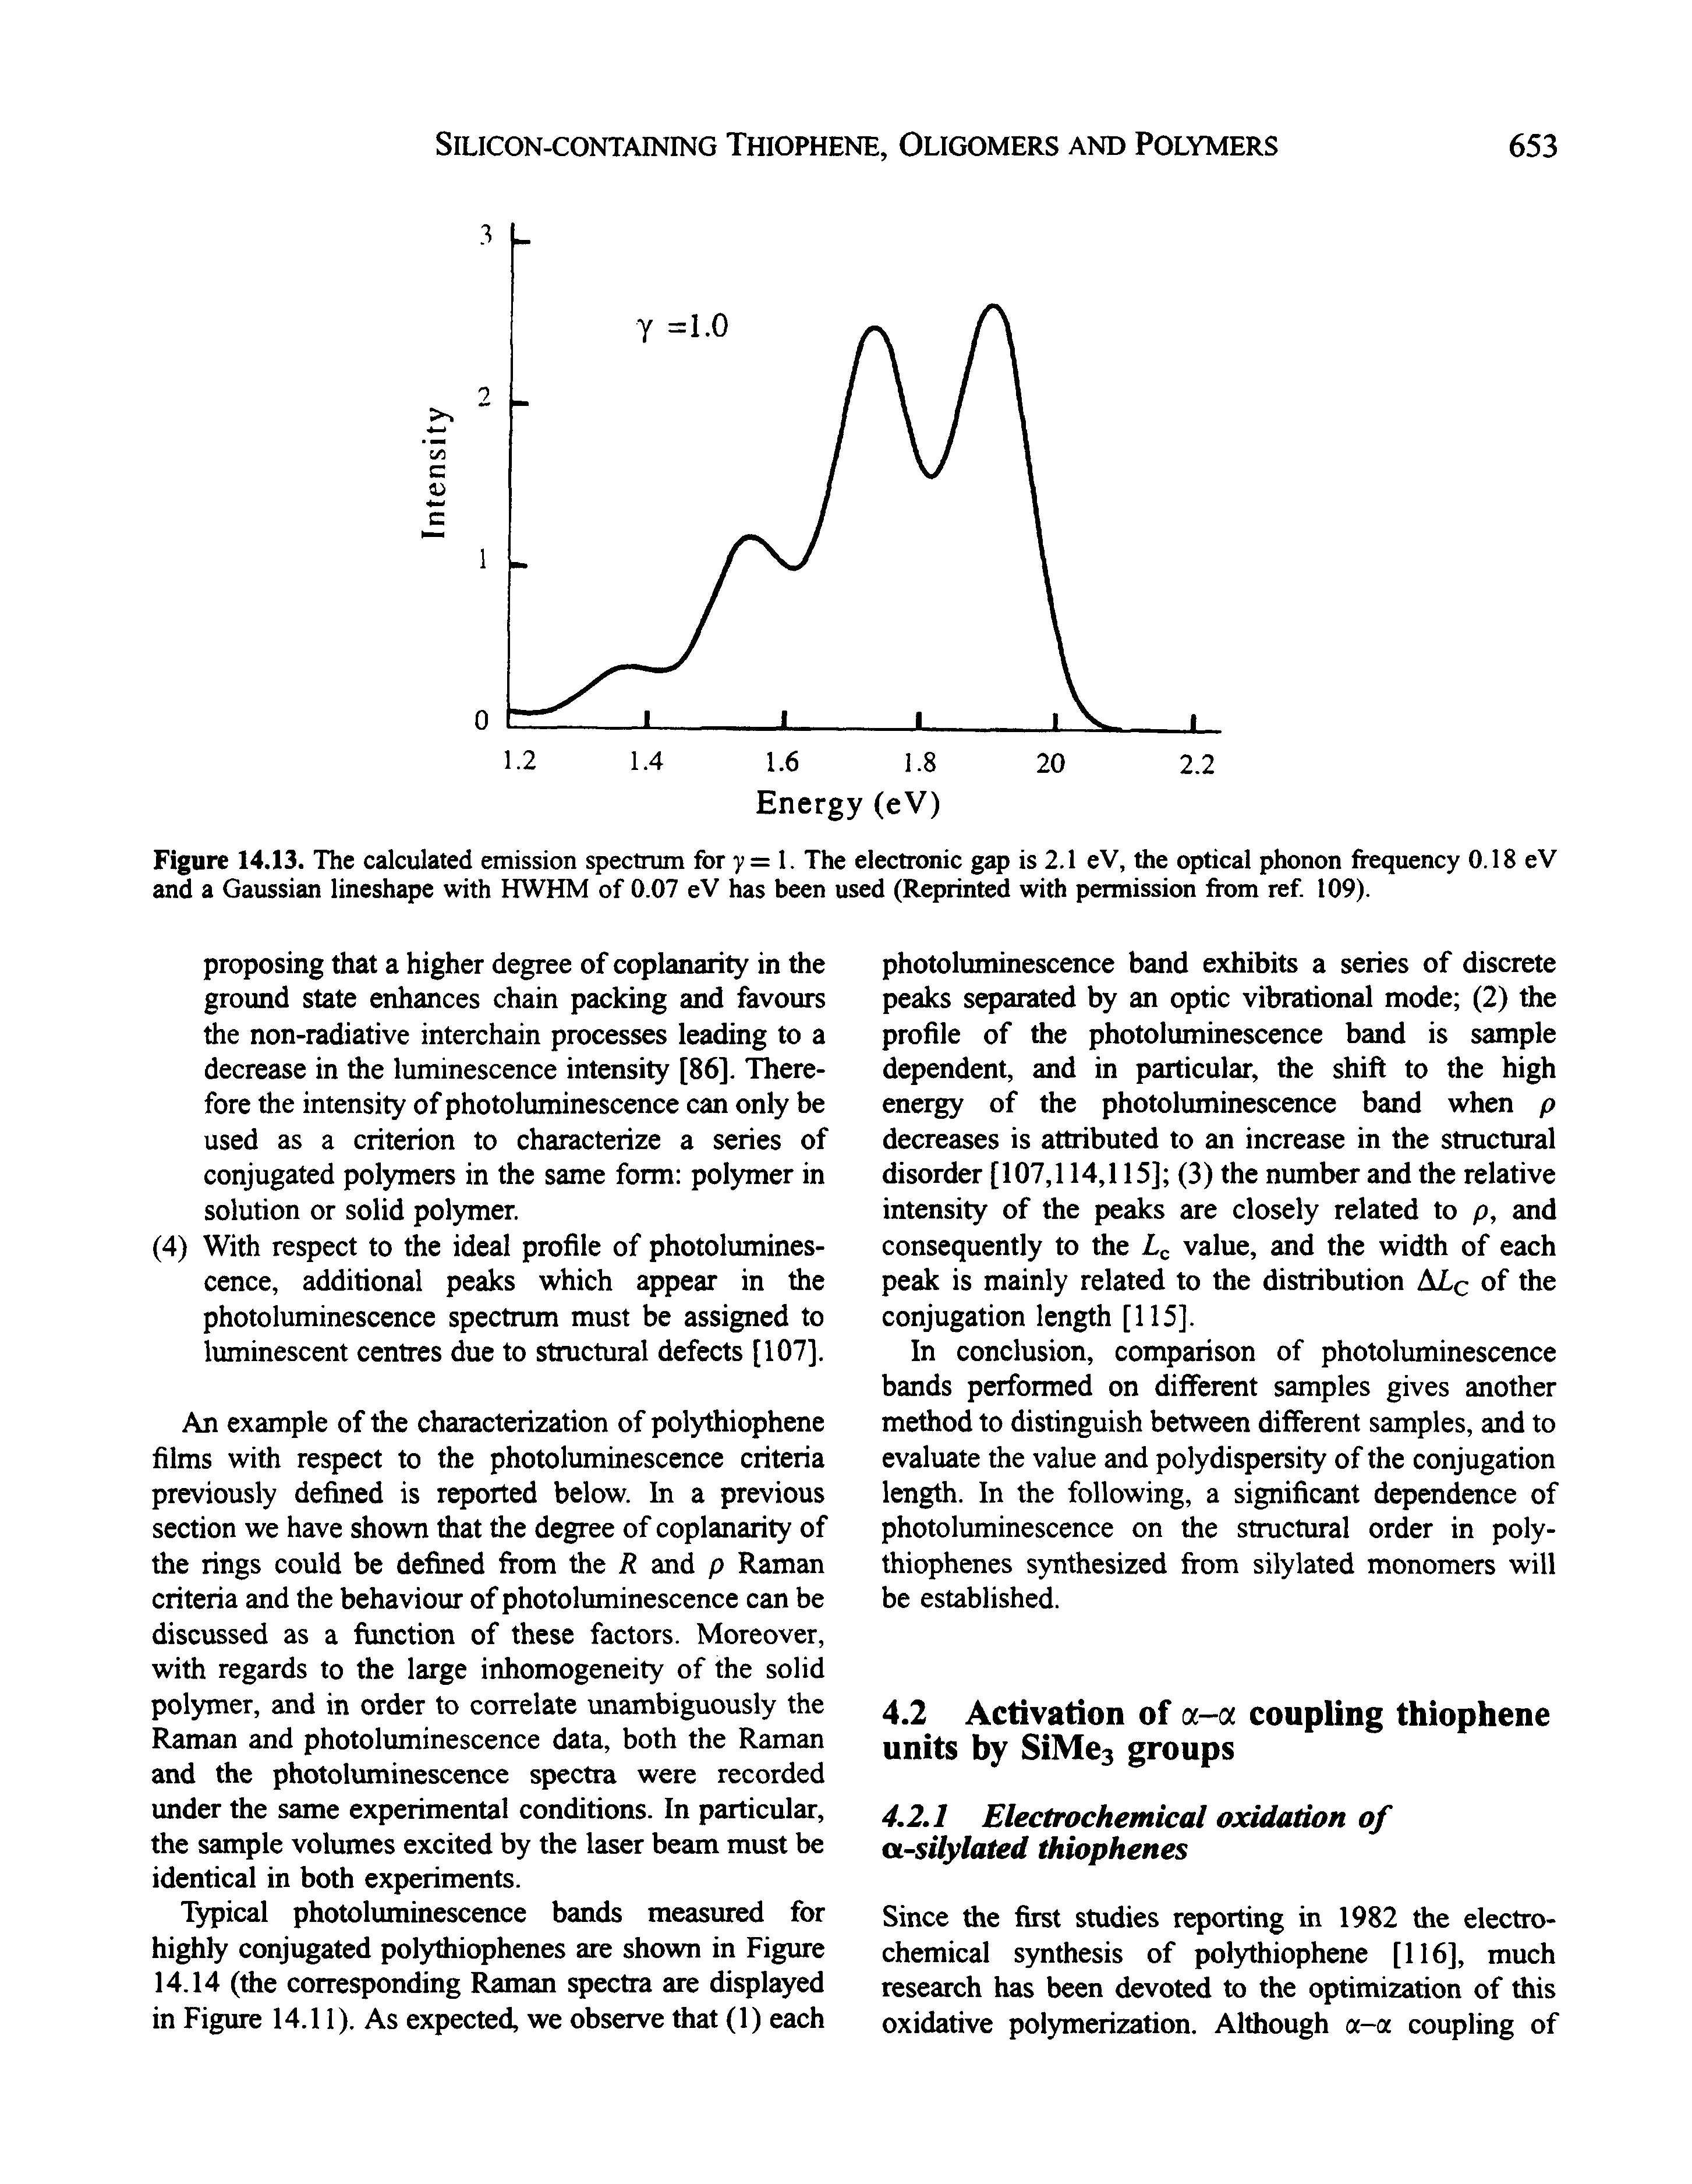 Figure 14.13. The calculated emission spectrum for y = 1. The electronic gap is 2.1 eV, the optical phonon frequency 0.18 eV and a Gaussian lineshape with HWHM of 0.07 eV has been used (Reprinted with permission from ref 109).